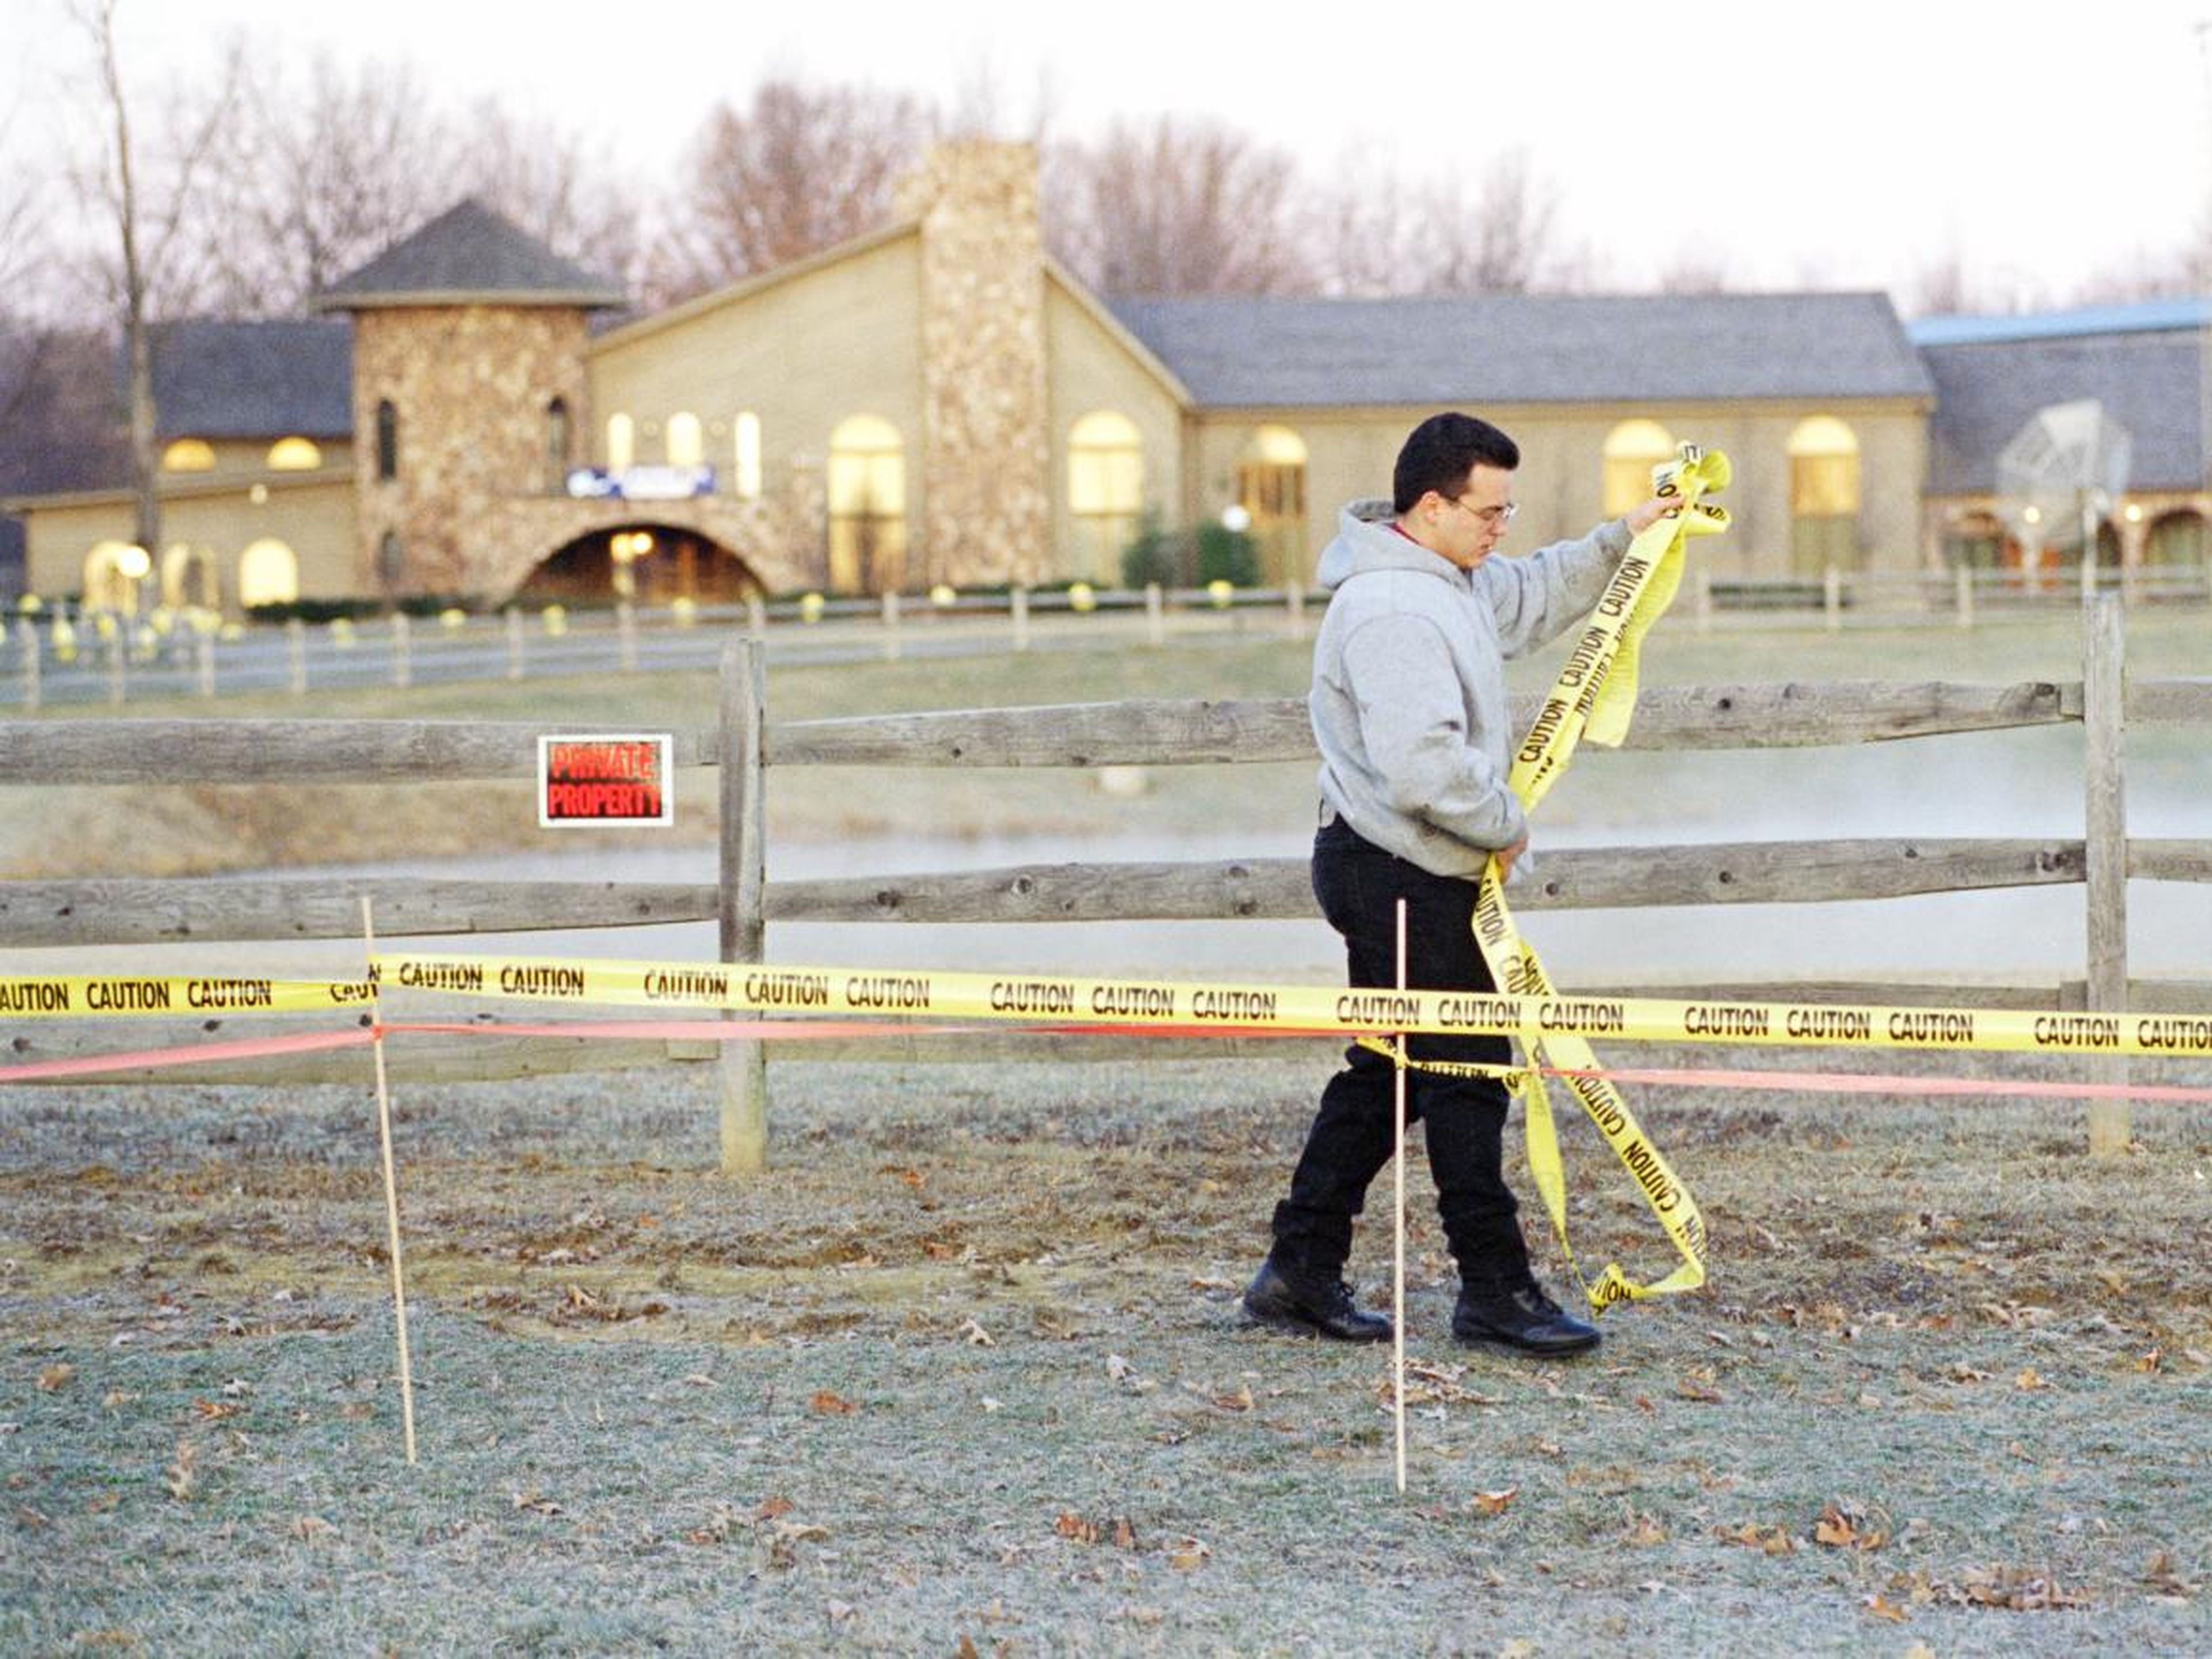 An unidentified man strings caution tape in front of the home of Mike Tyson near Southington, Ohio,